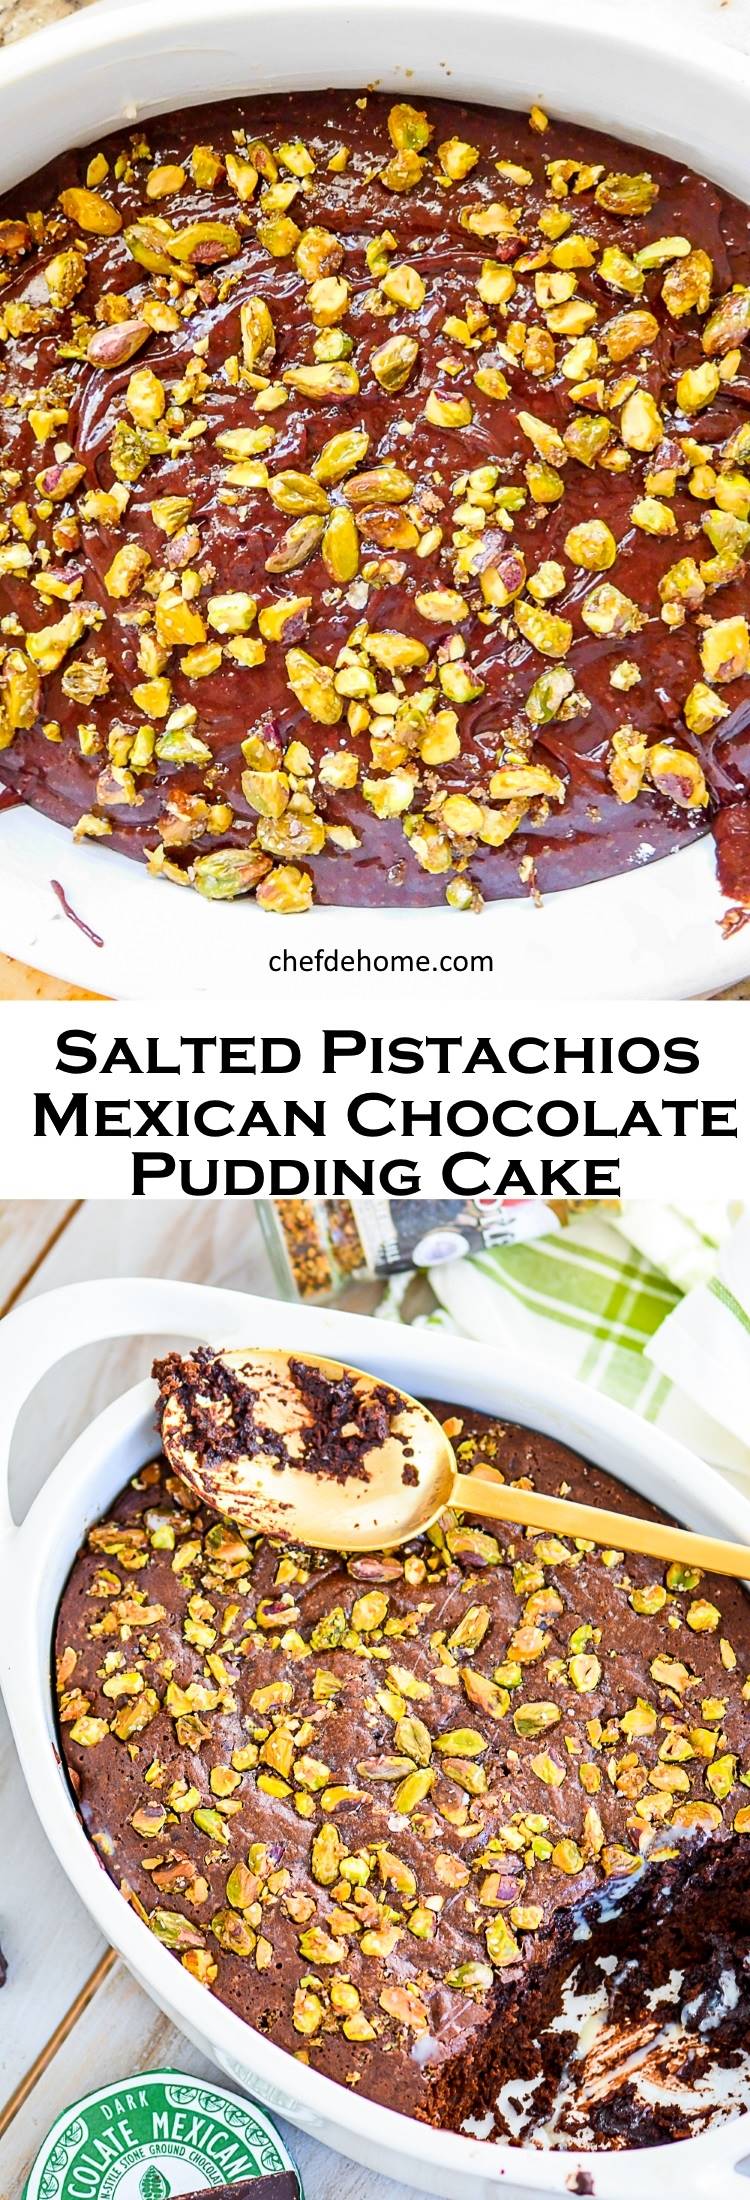 Double Mexican Chocolate Pudding Cake with hint of chili and topping of roasted light sweet and salty Pistachios | chefdehome.com